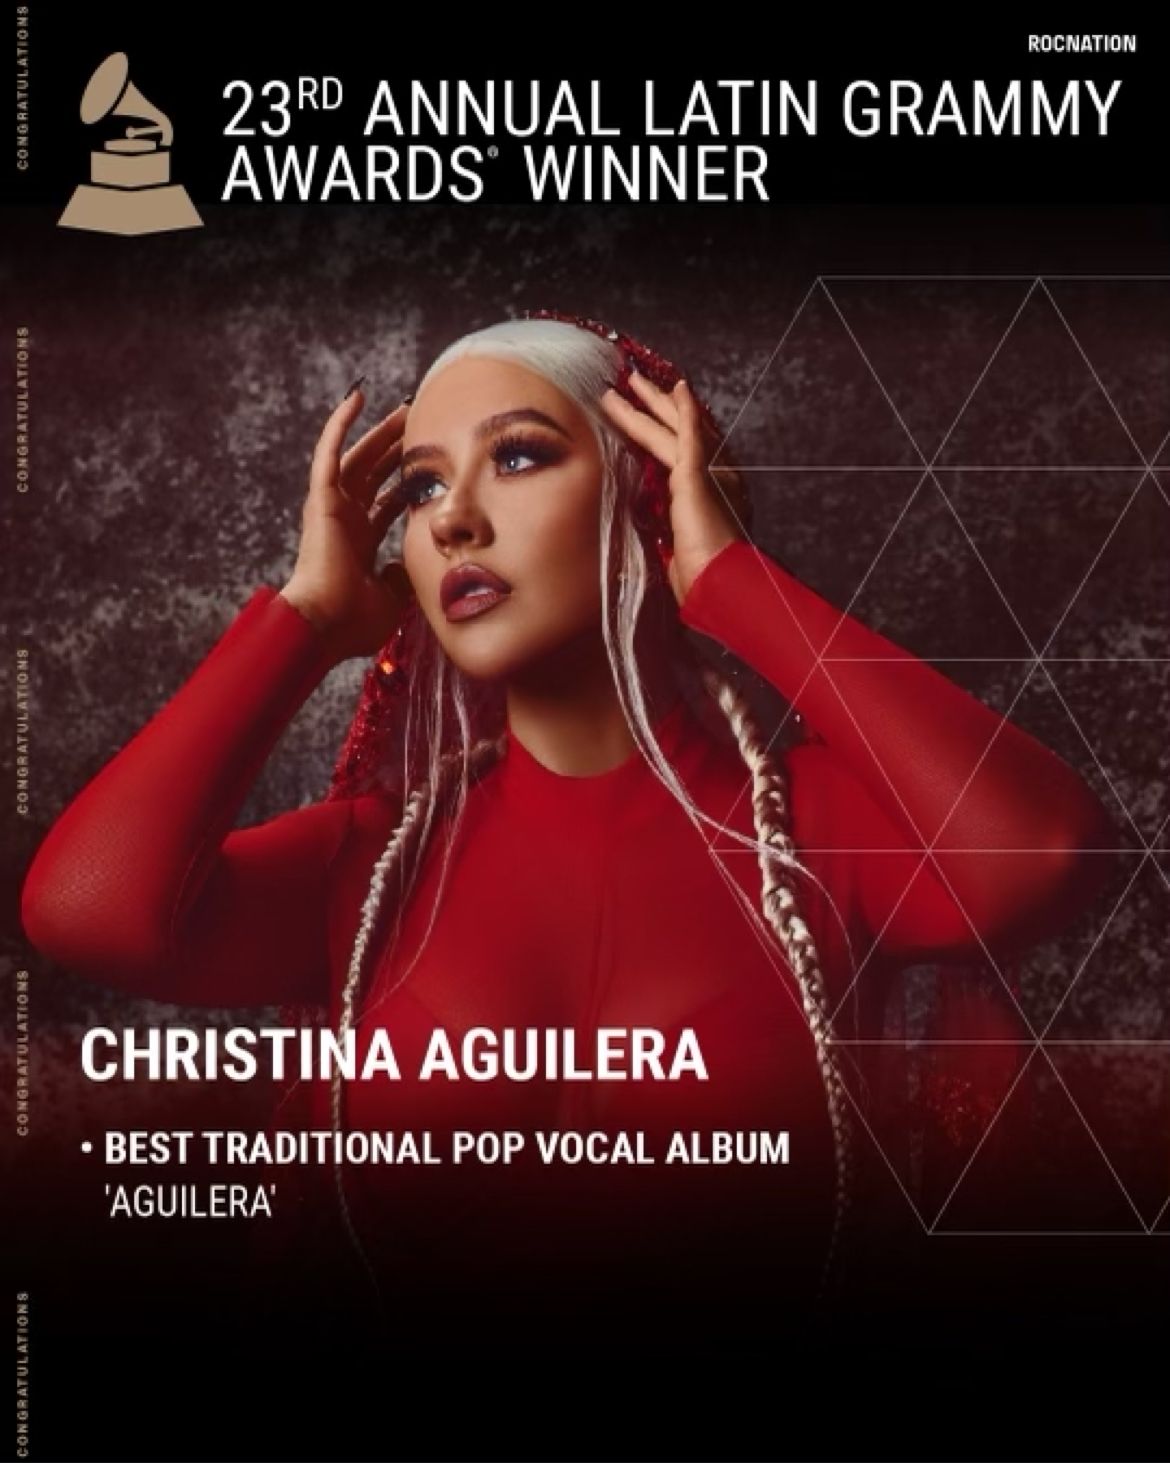 Congratulations To Christina Aguilera For Winning Best Traditional Pop